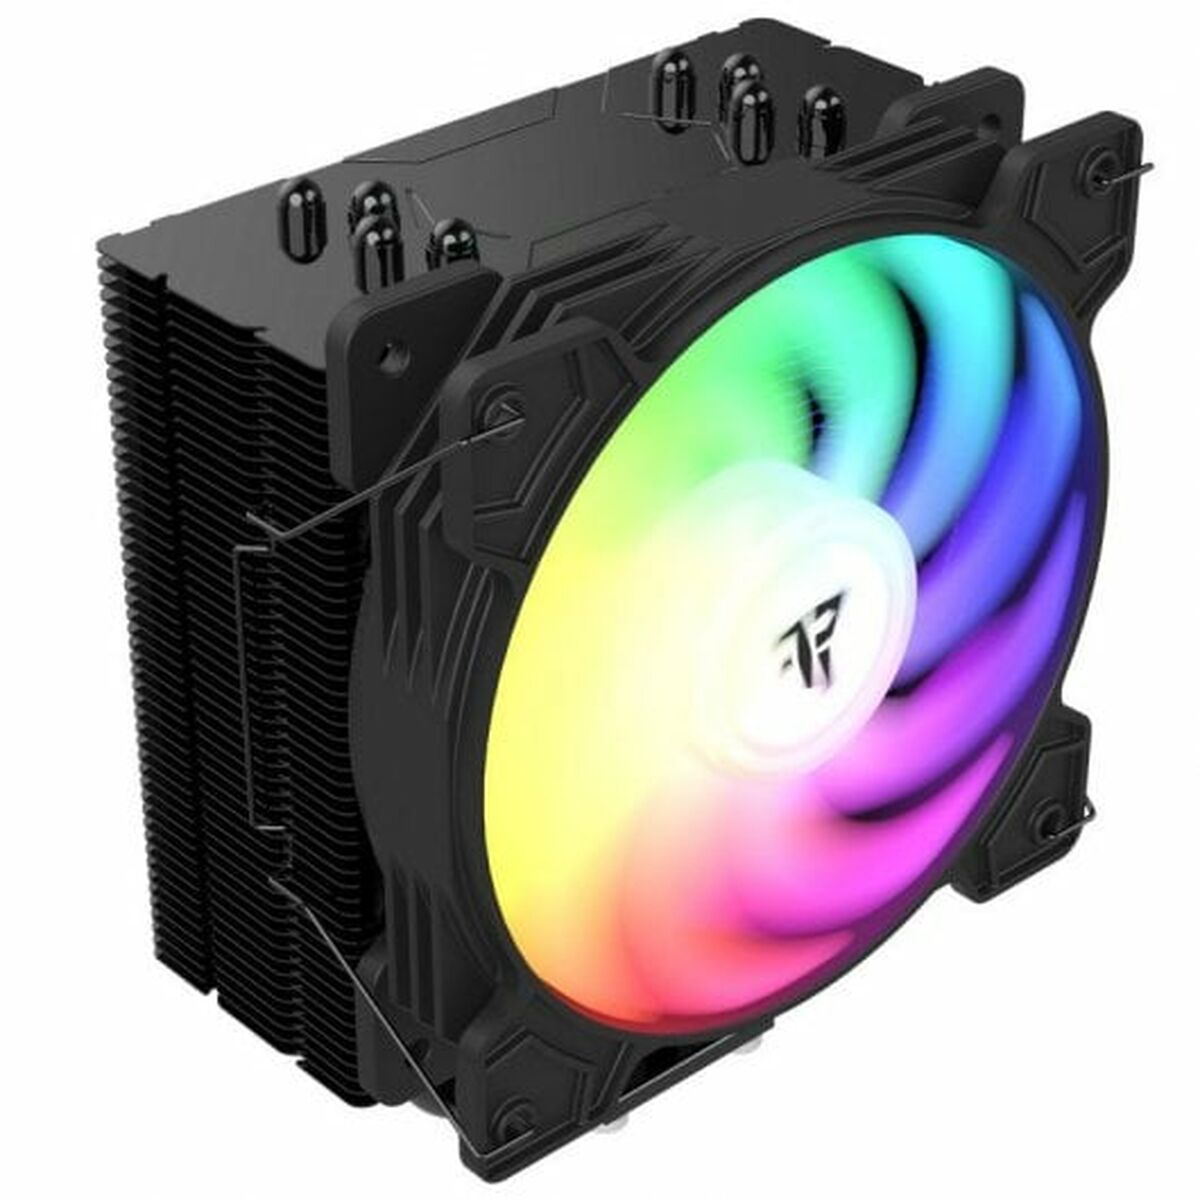 CPU Fan Tempest, Tempest, Computing, Components, cpu-fan-tempest-5, Brand_Tempest, category-reference-2609, category-reference-2803, category-reference-2815, category-reference-t-19685, category-reference-t-19912, category-reference-t-21360, category-reference-t-25668, category-reference-t-29842, computers / components, Condition_NEW, Price_100 - 200, Teleworking, RiotNook